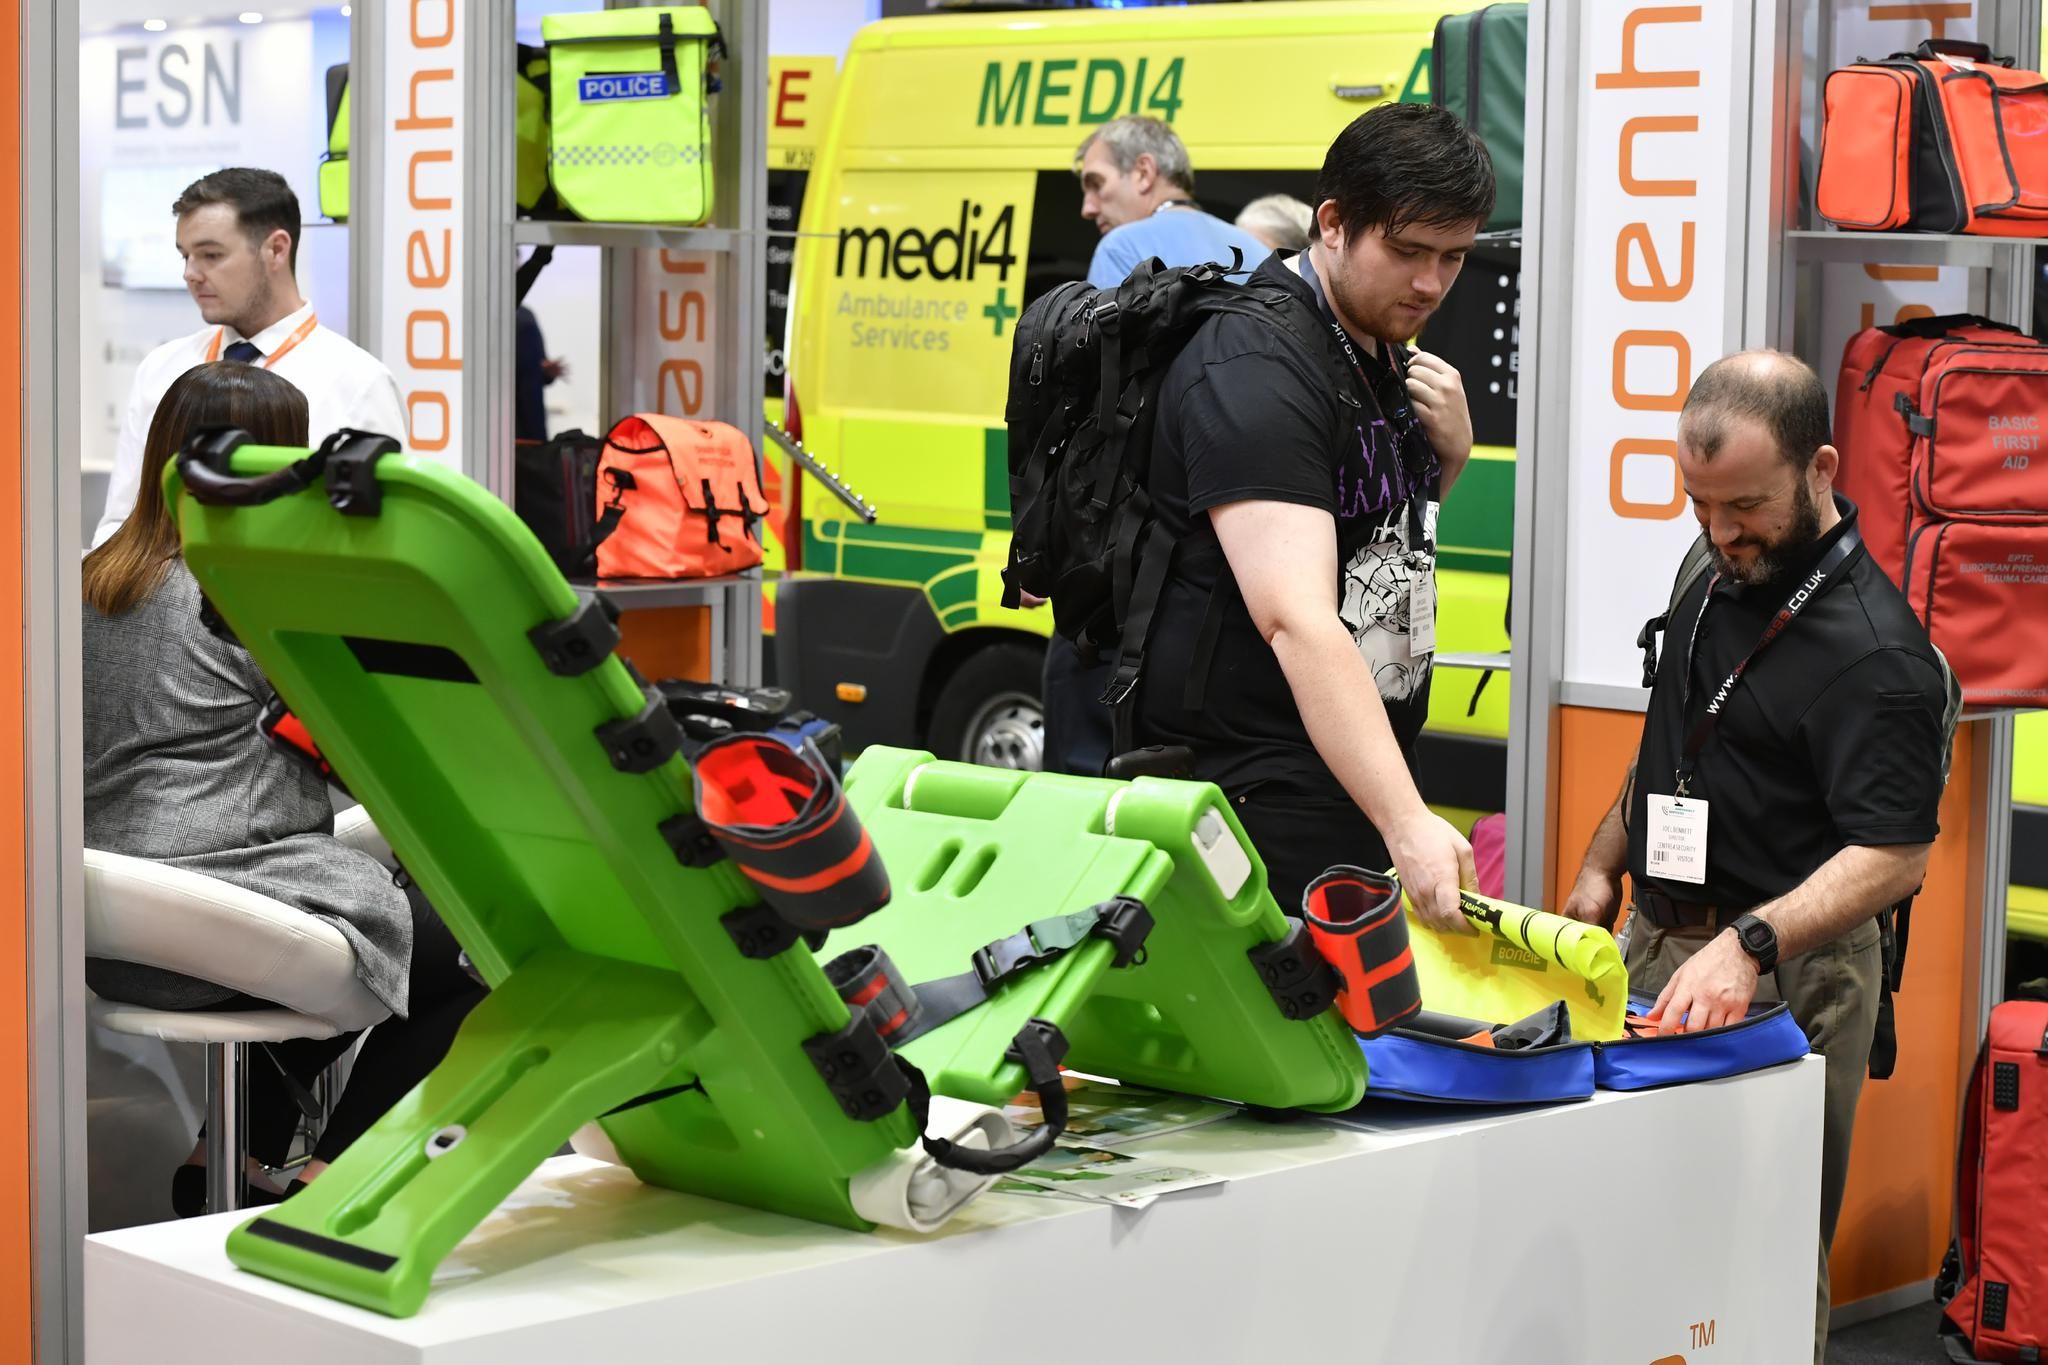 Ambulance news - Discover Emerging Technologies at The Emergency Services Show